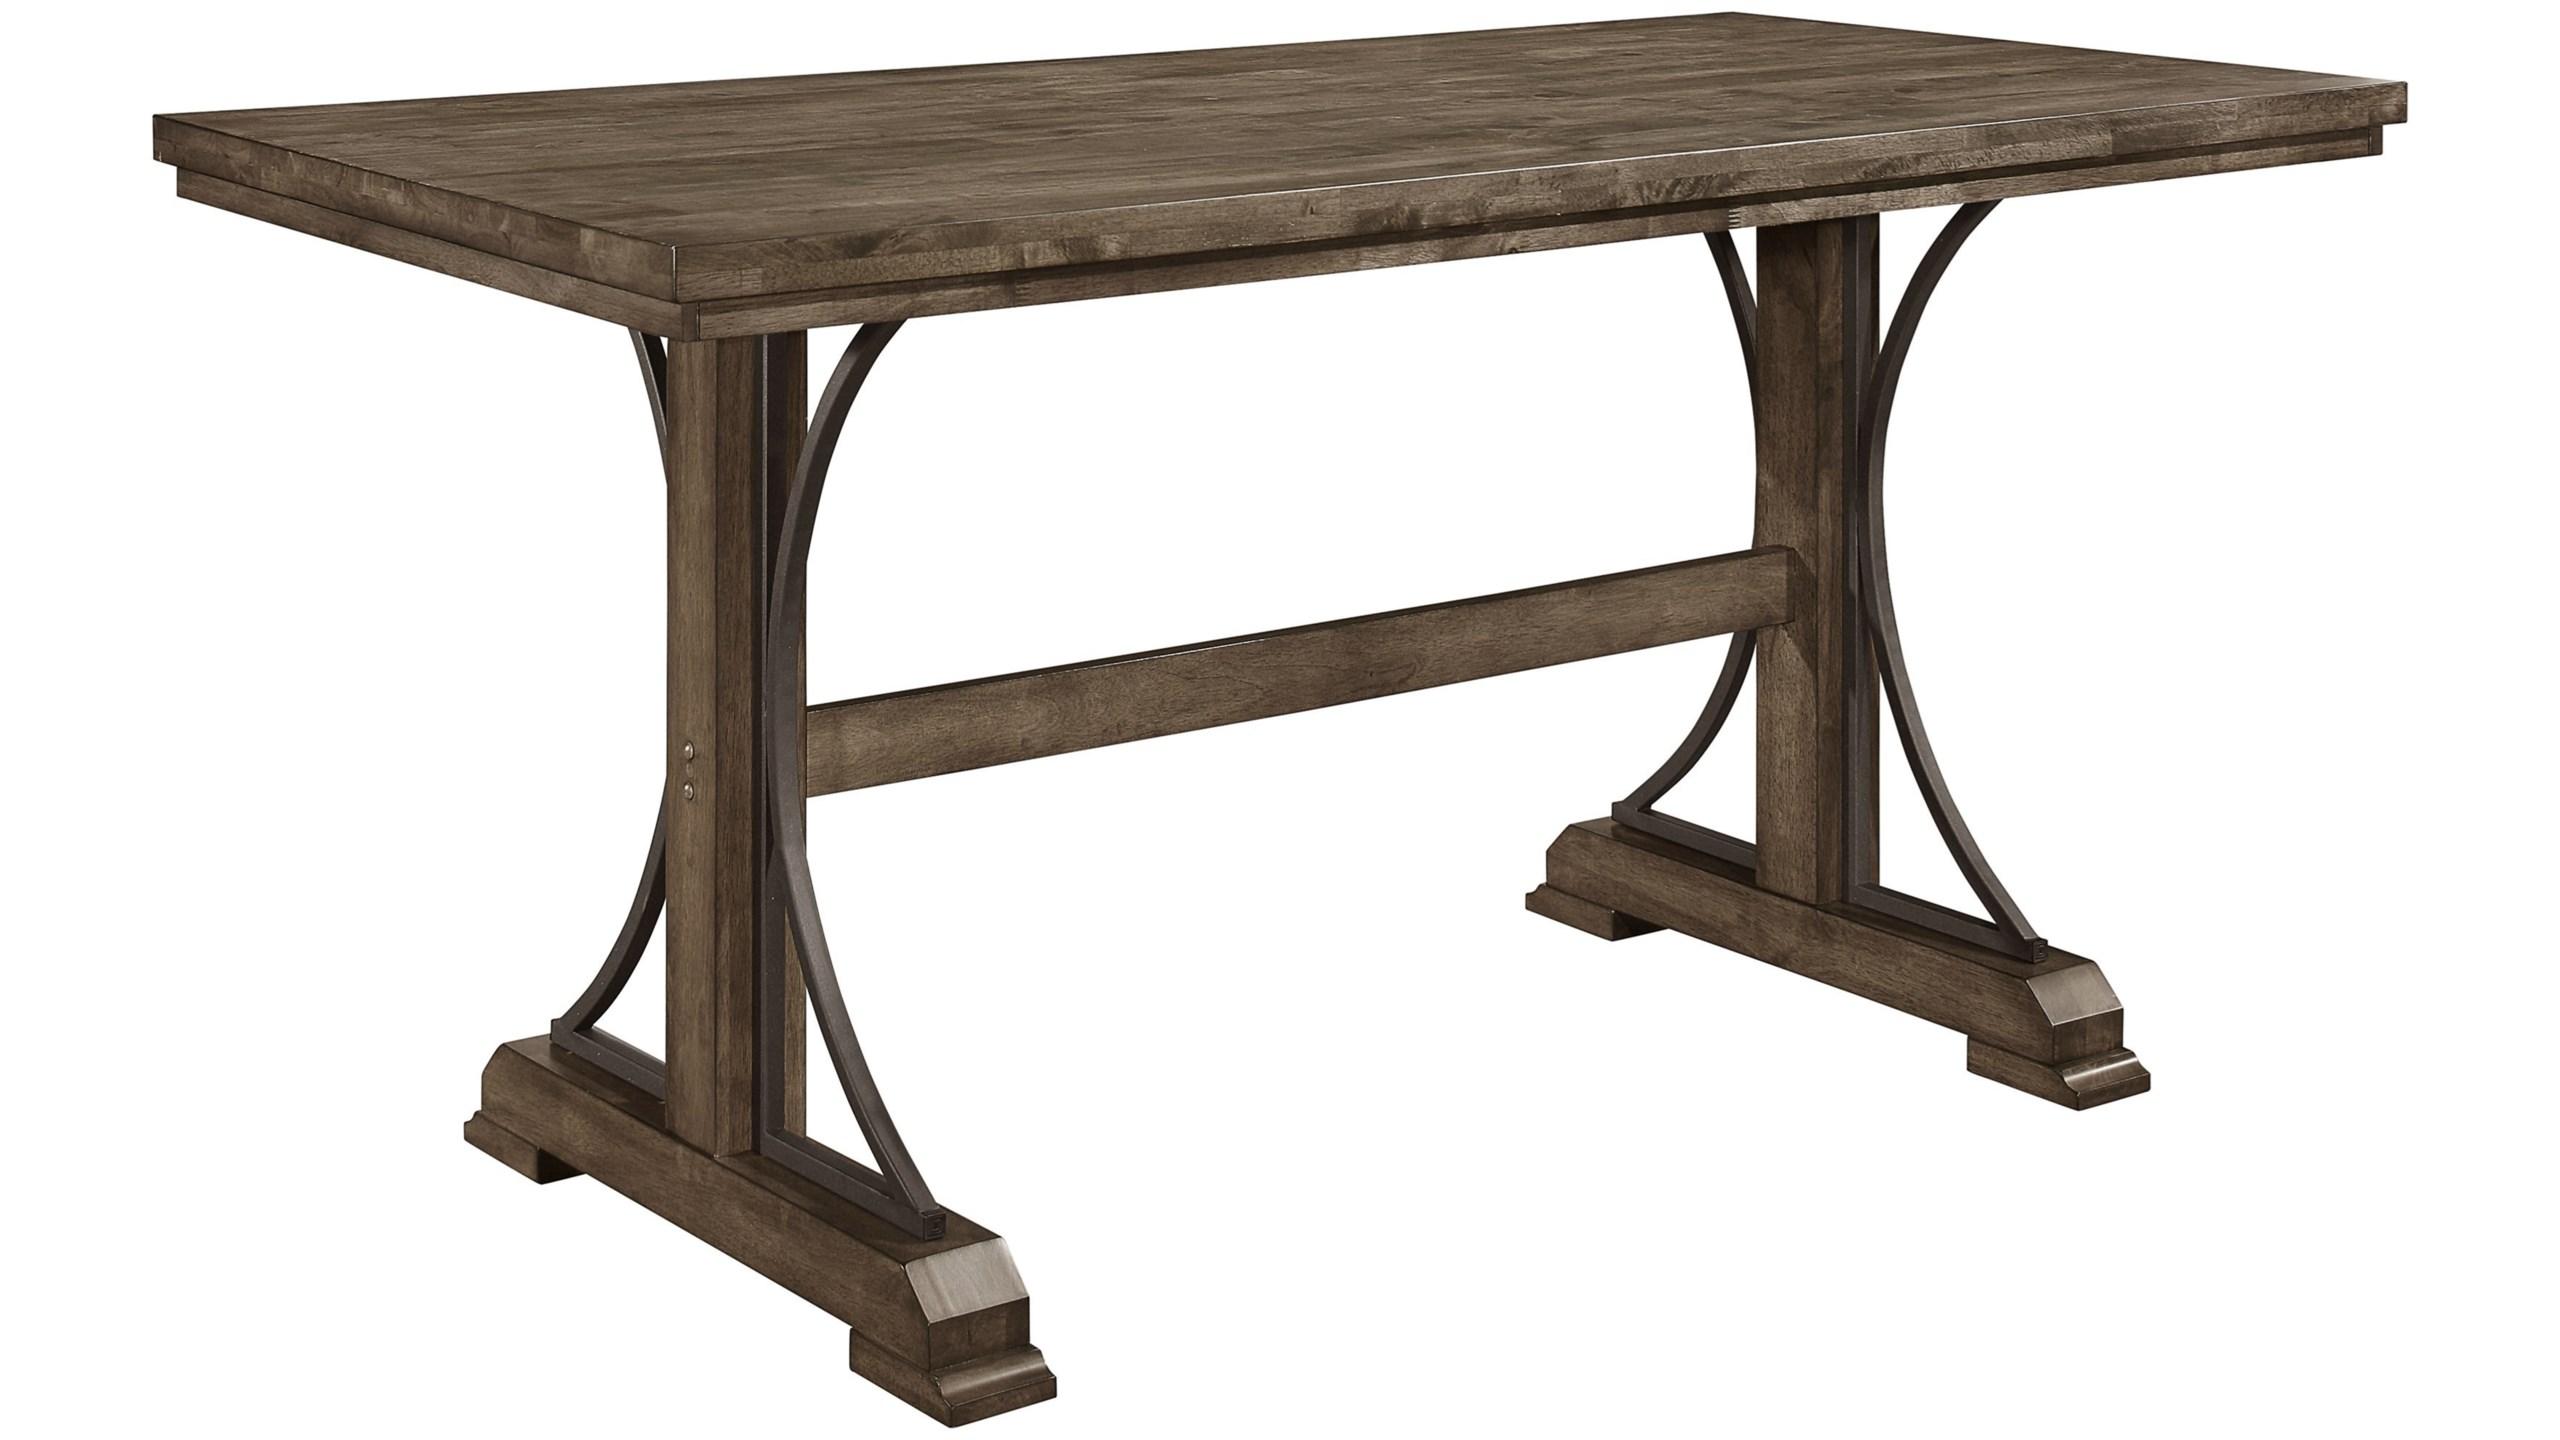 Modern, Farmhouse Counter Height Table Quincy 2831T-3671 in Brown Oak 